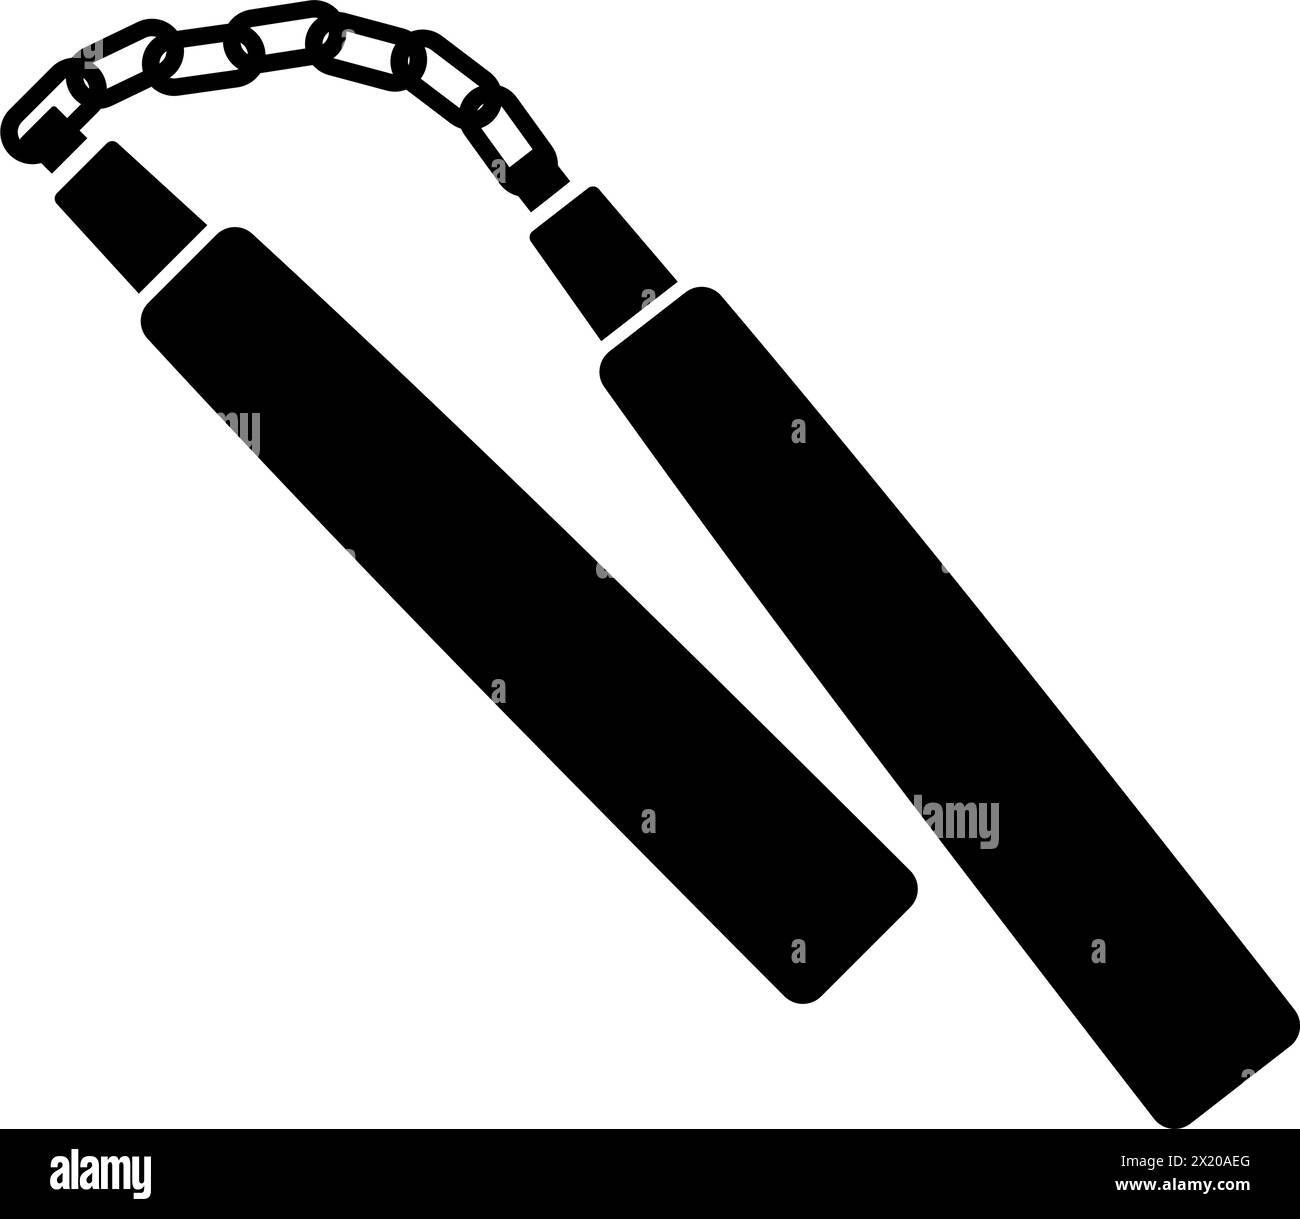 Martial arts weapons and equipment: nunchuck icon Stock Vector